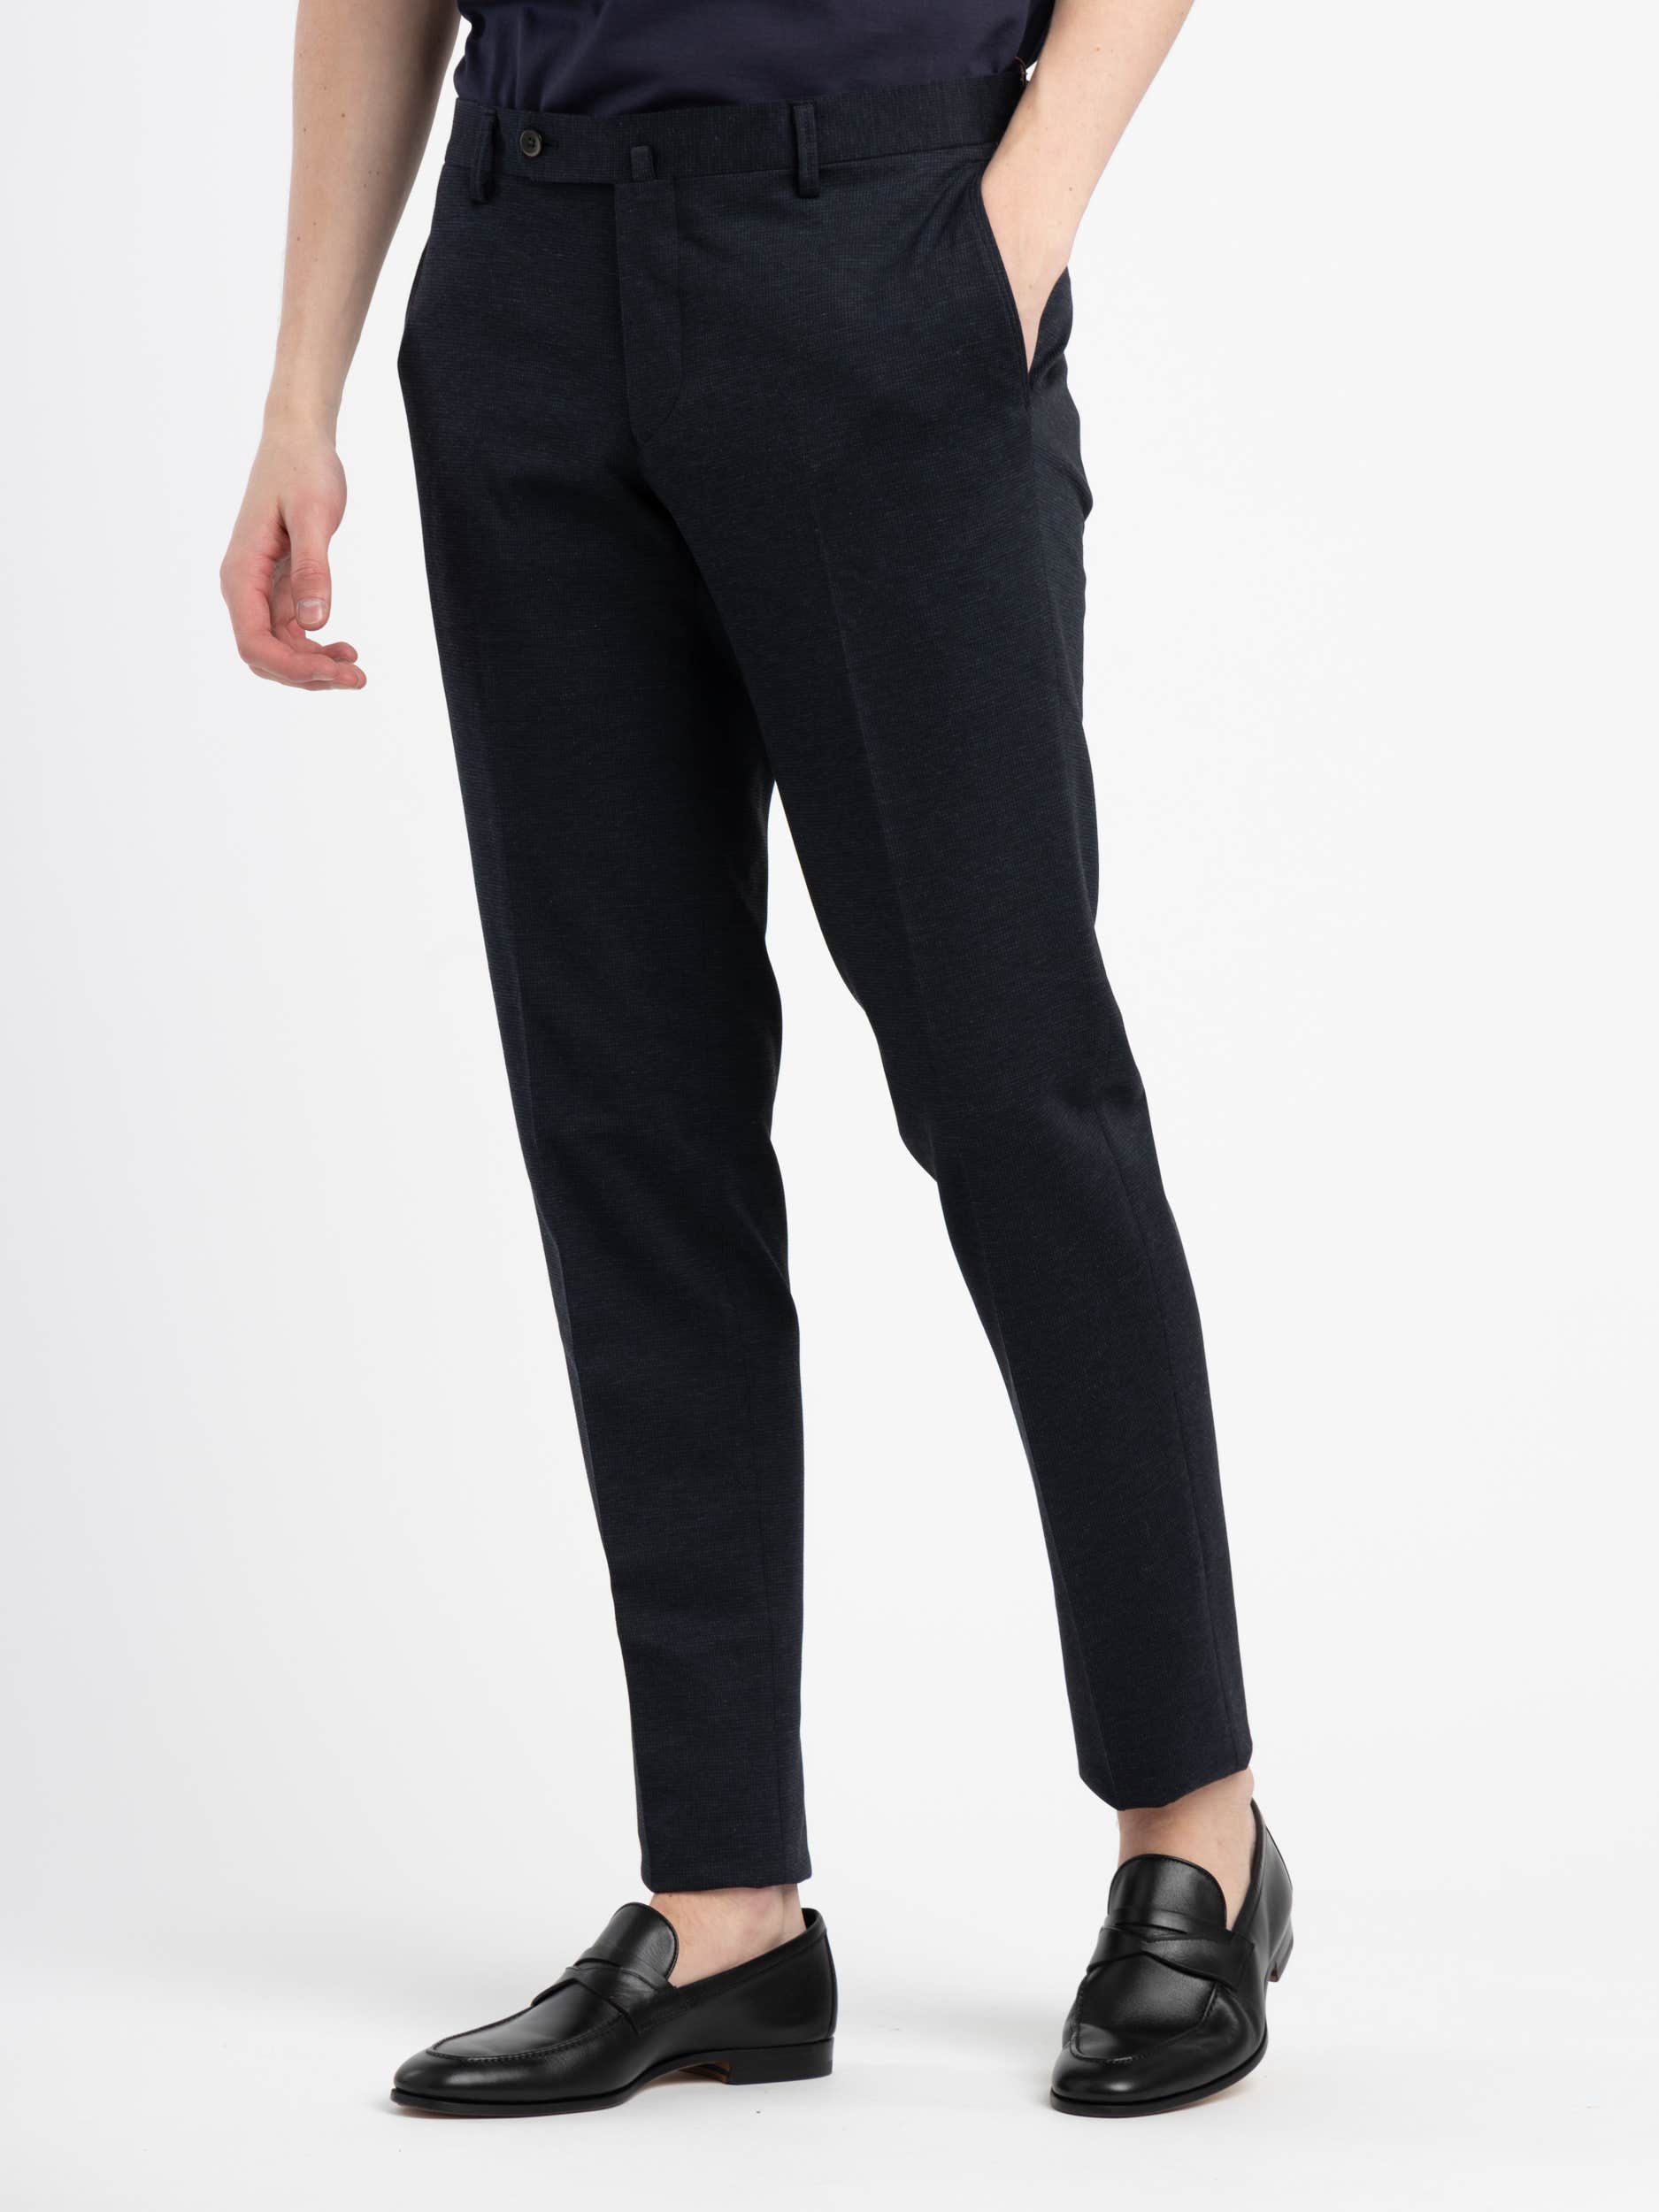 Navy Print Performance Trousers